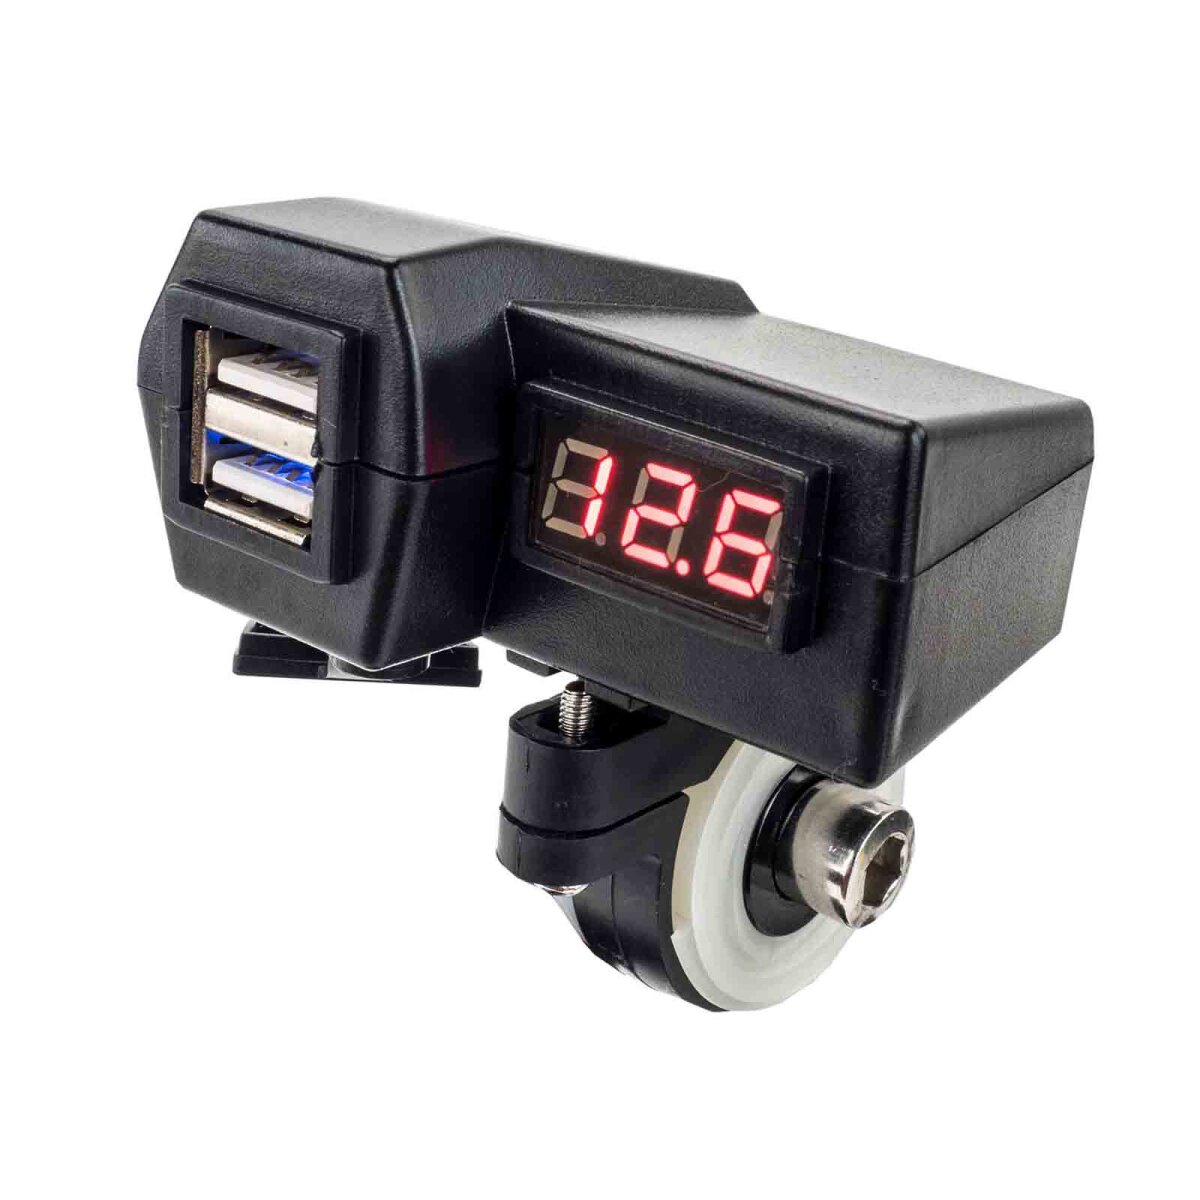 Motorcycle USB Charger with 2 Slots plus Digital Voltmeter, 22,90 €